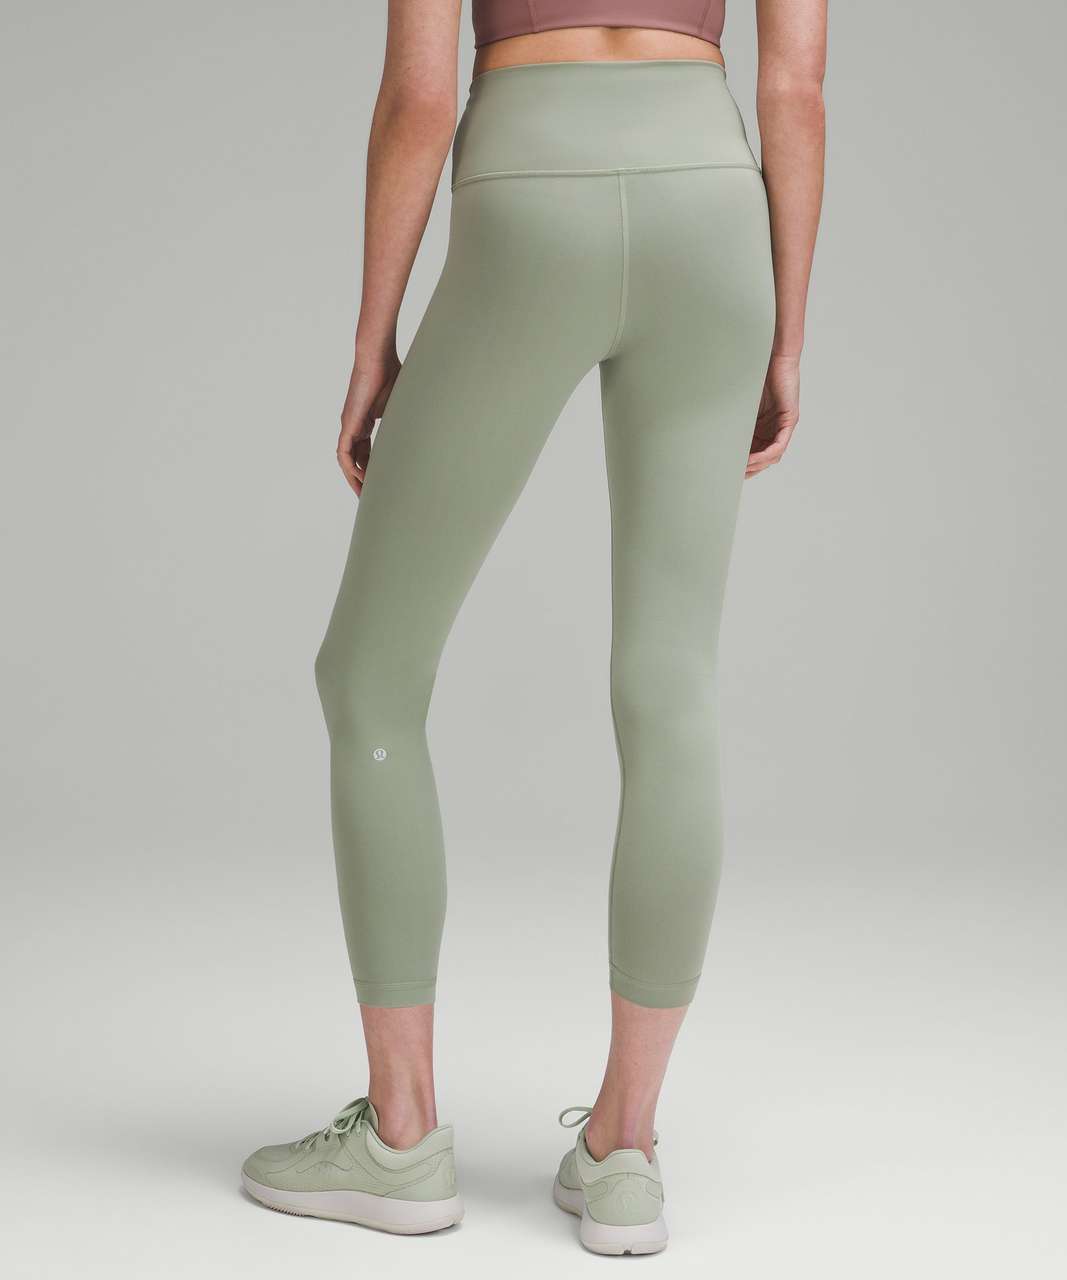 Lululemon Wunder Under Luxtreme High-Rise Tight Legging 25 inch in Light  Green 8 - $46 - From Emily